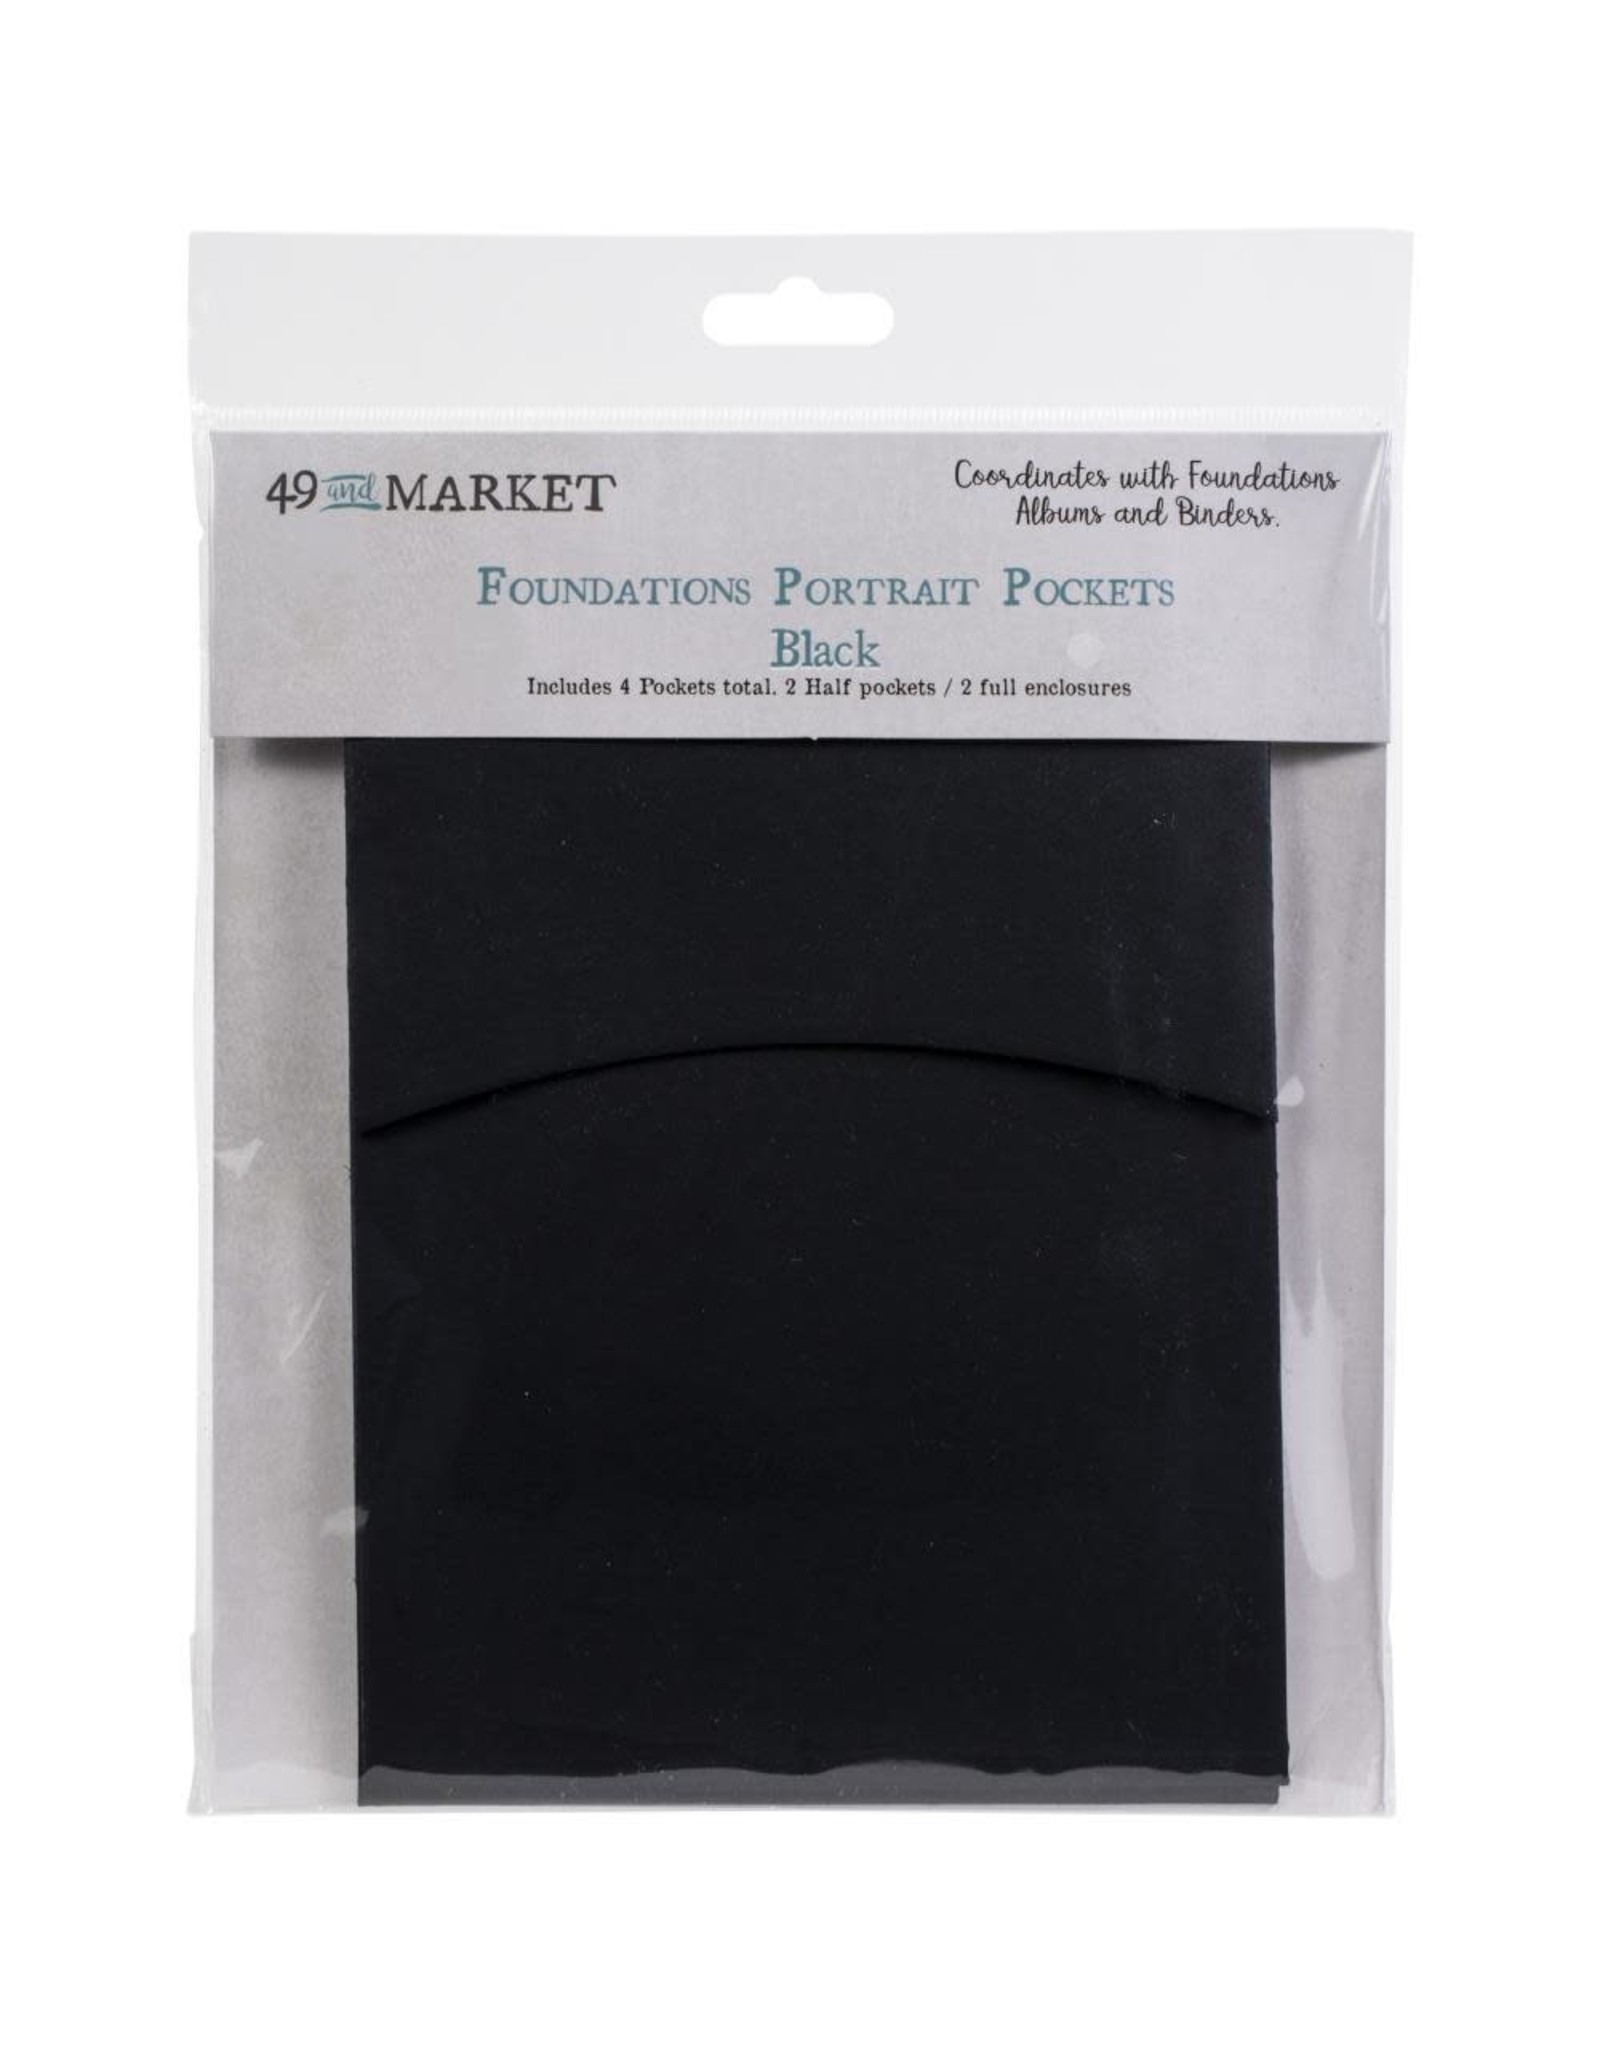 49 AND MARKET 49 AND MARKET BLACK FOUNDATIONS PORTRAIT POCKETS